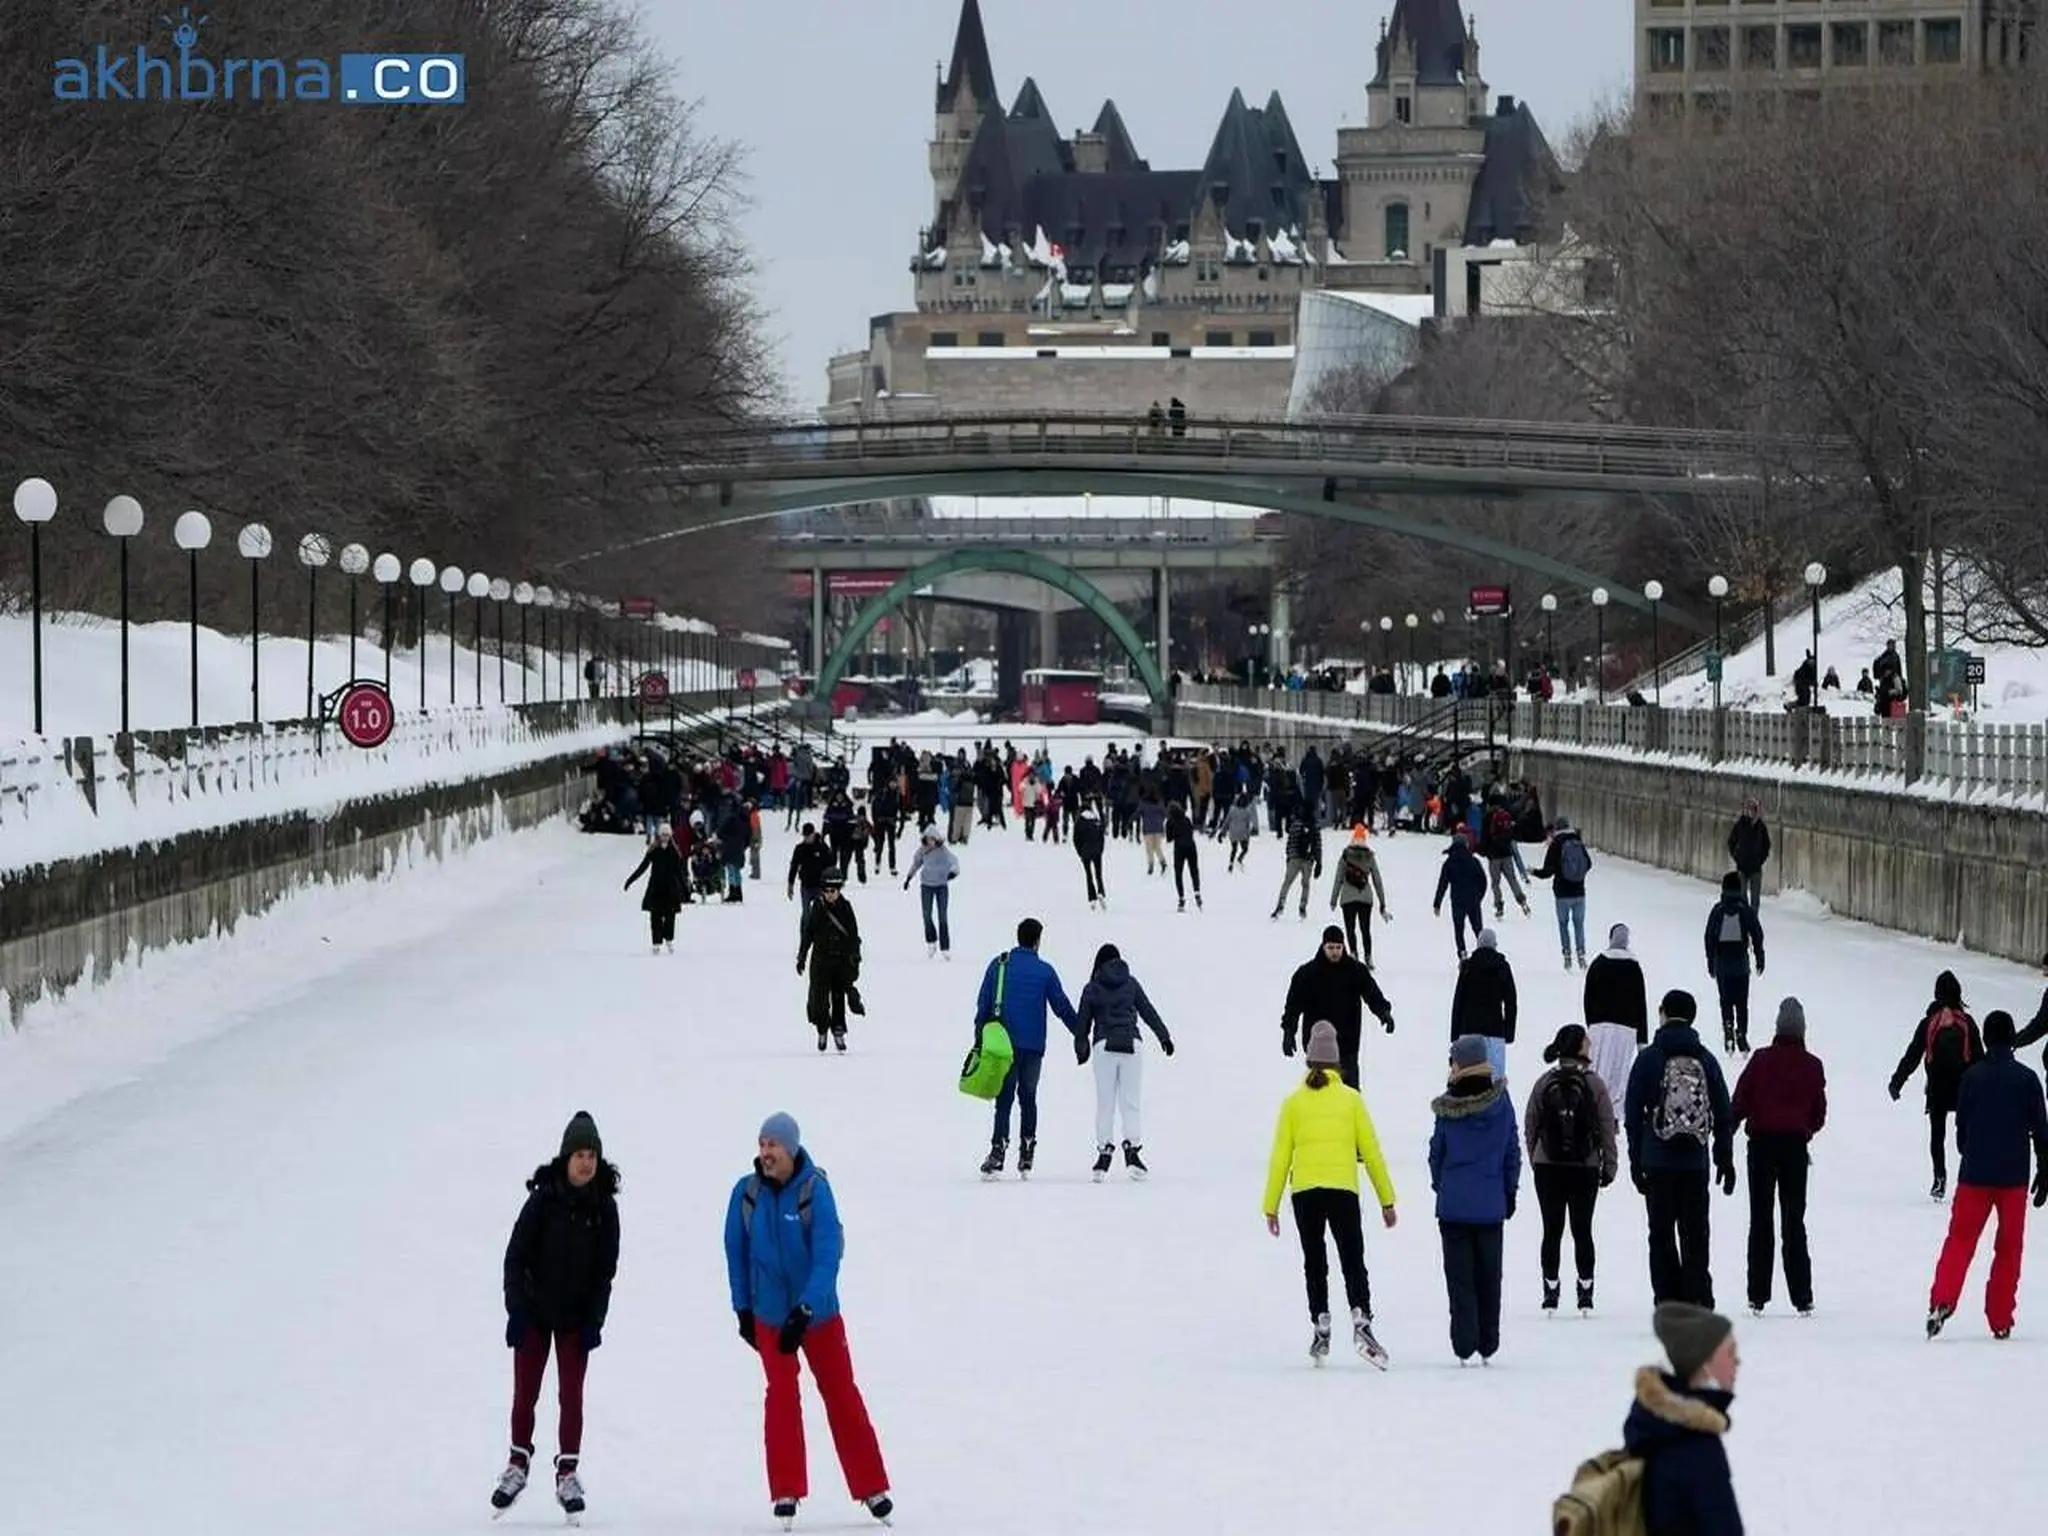 Canada announces the opening of the Rideau Canal Skateway for skating today